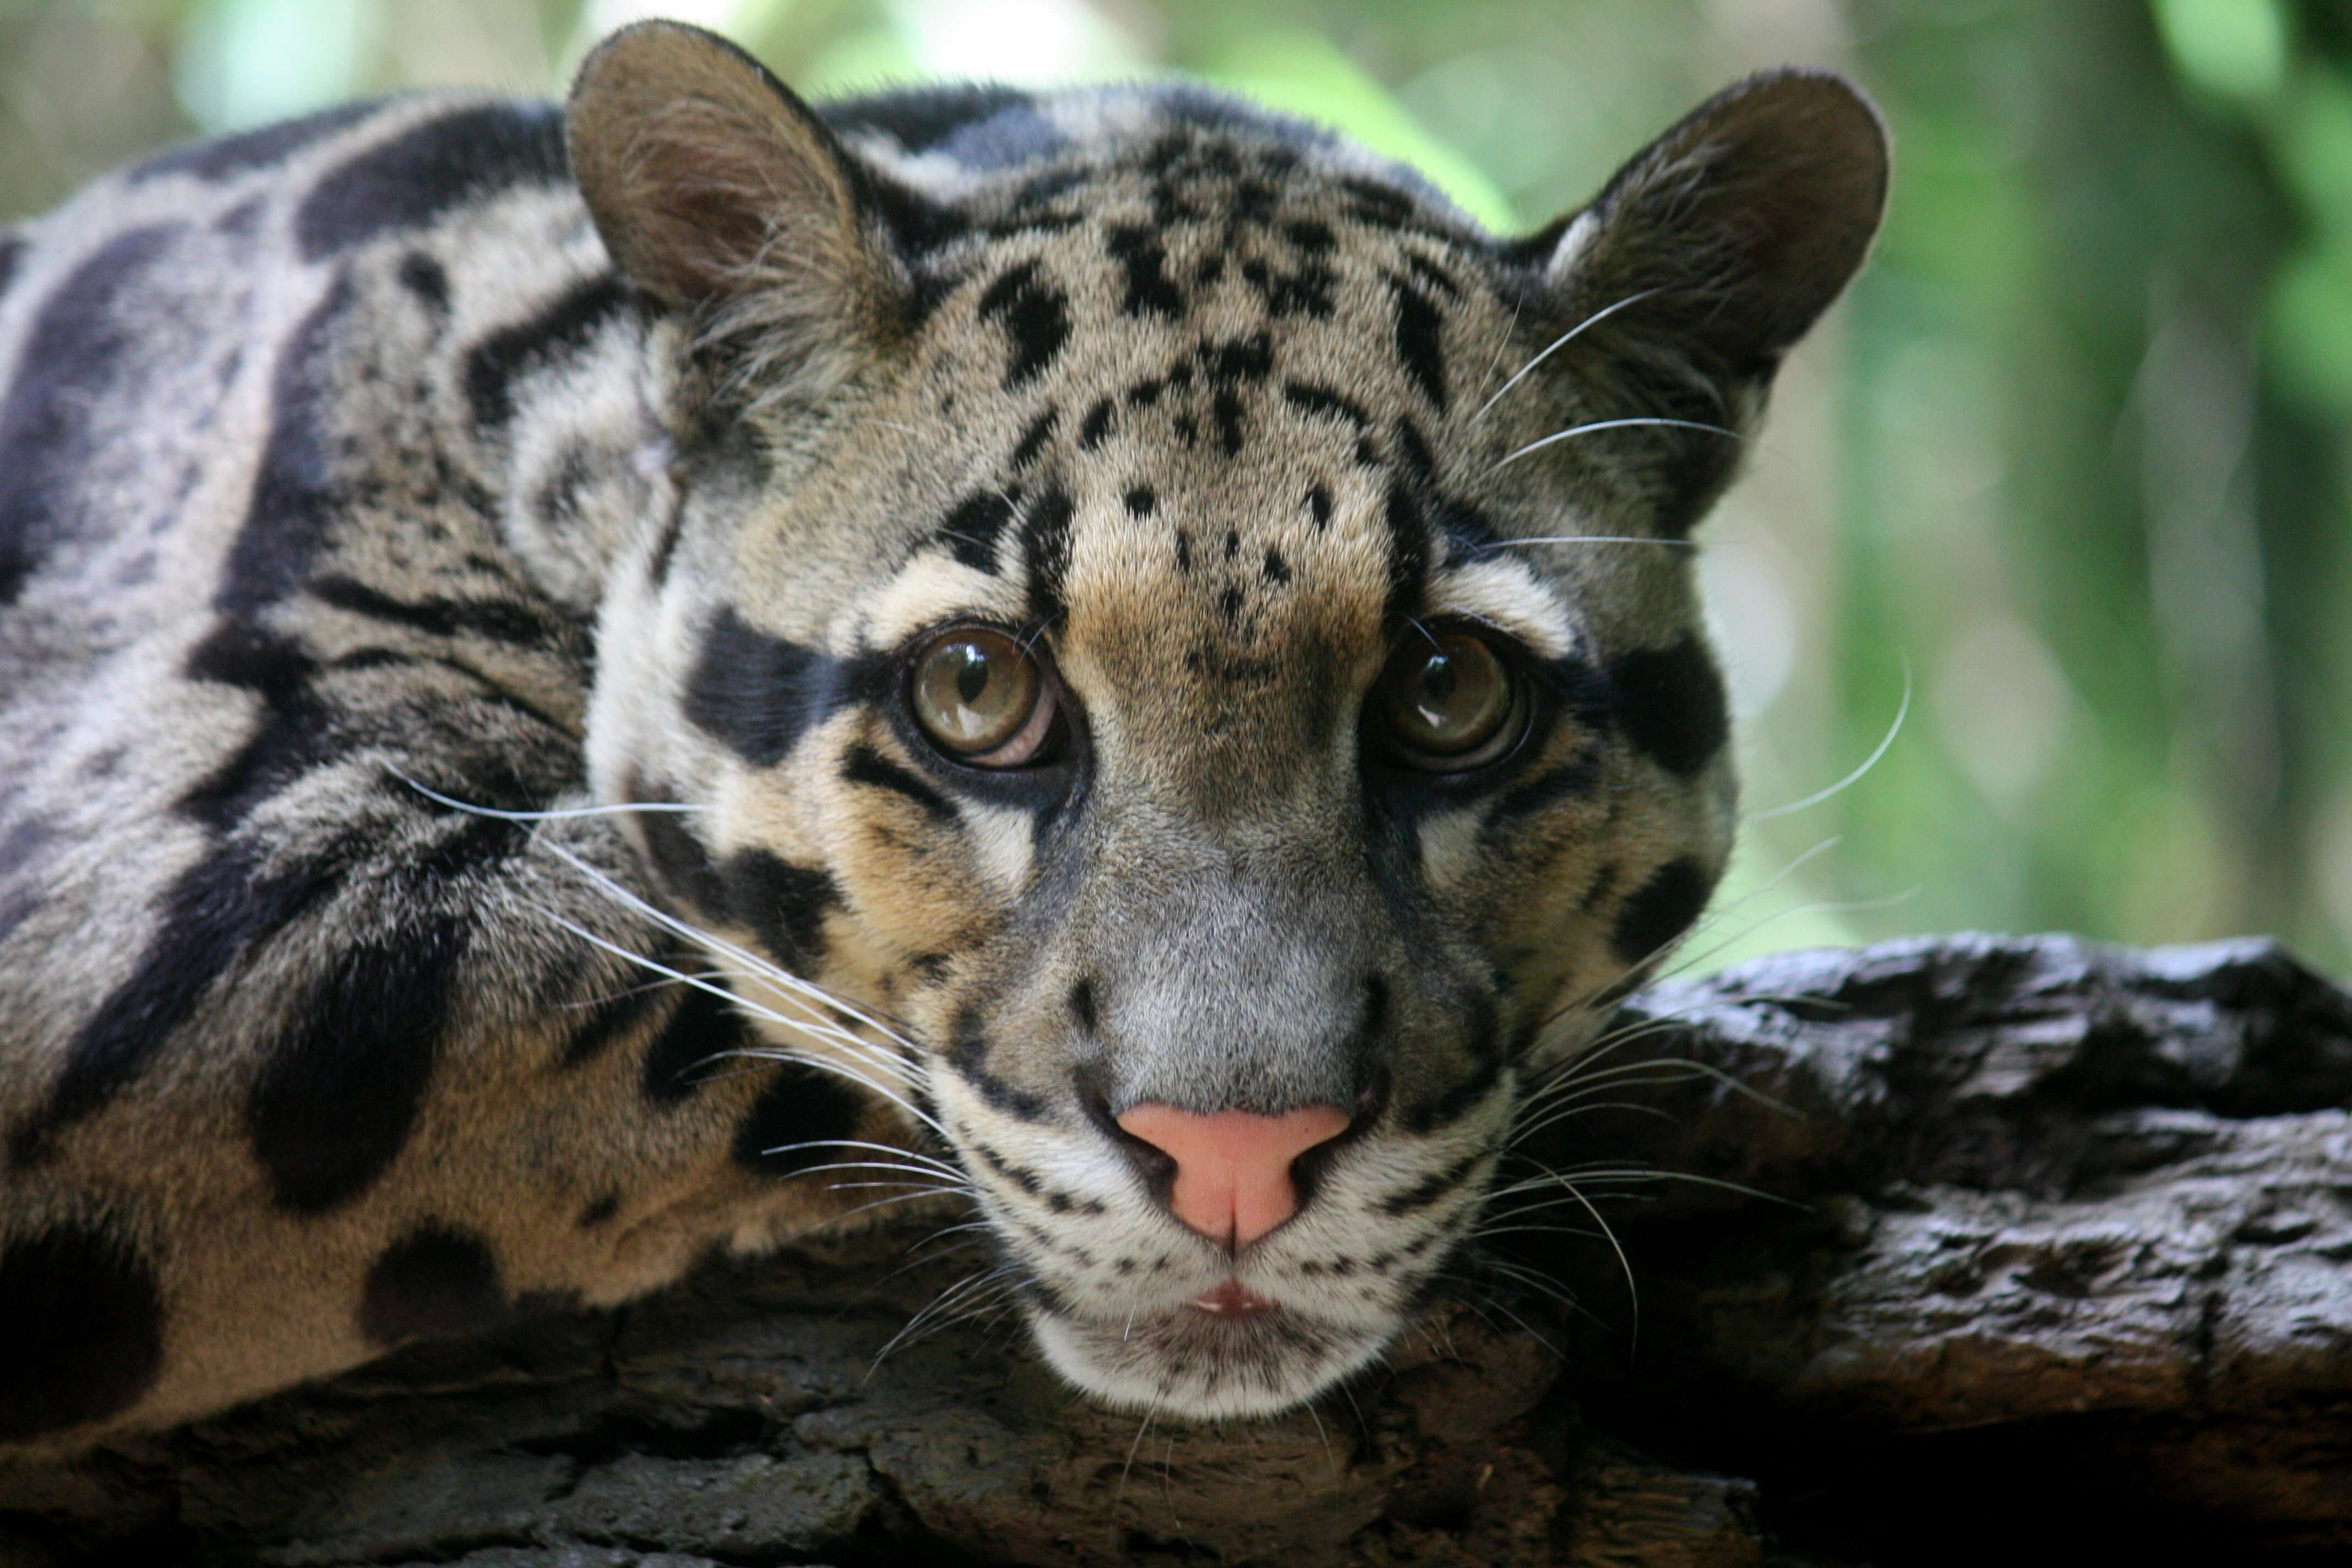 Image of clouded leopard